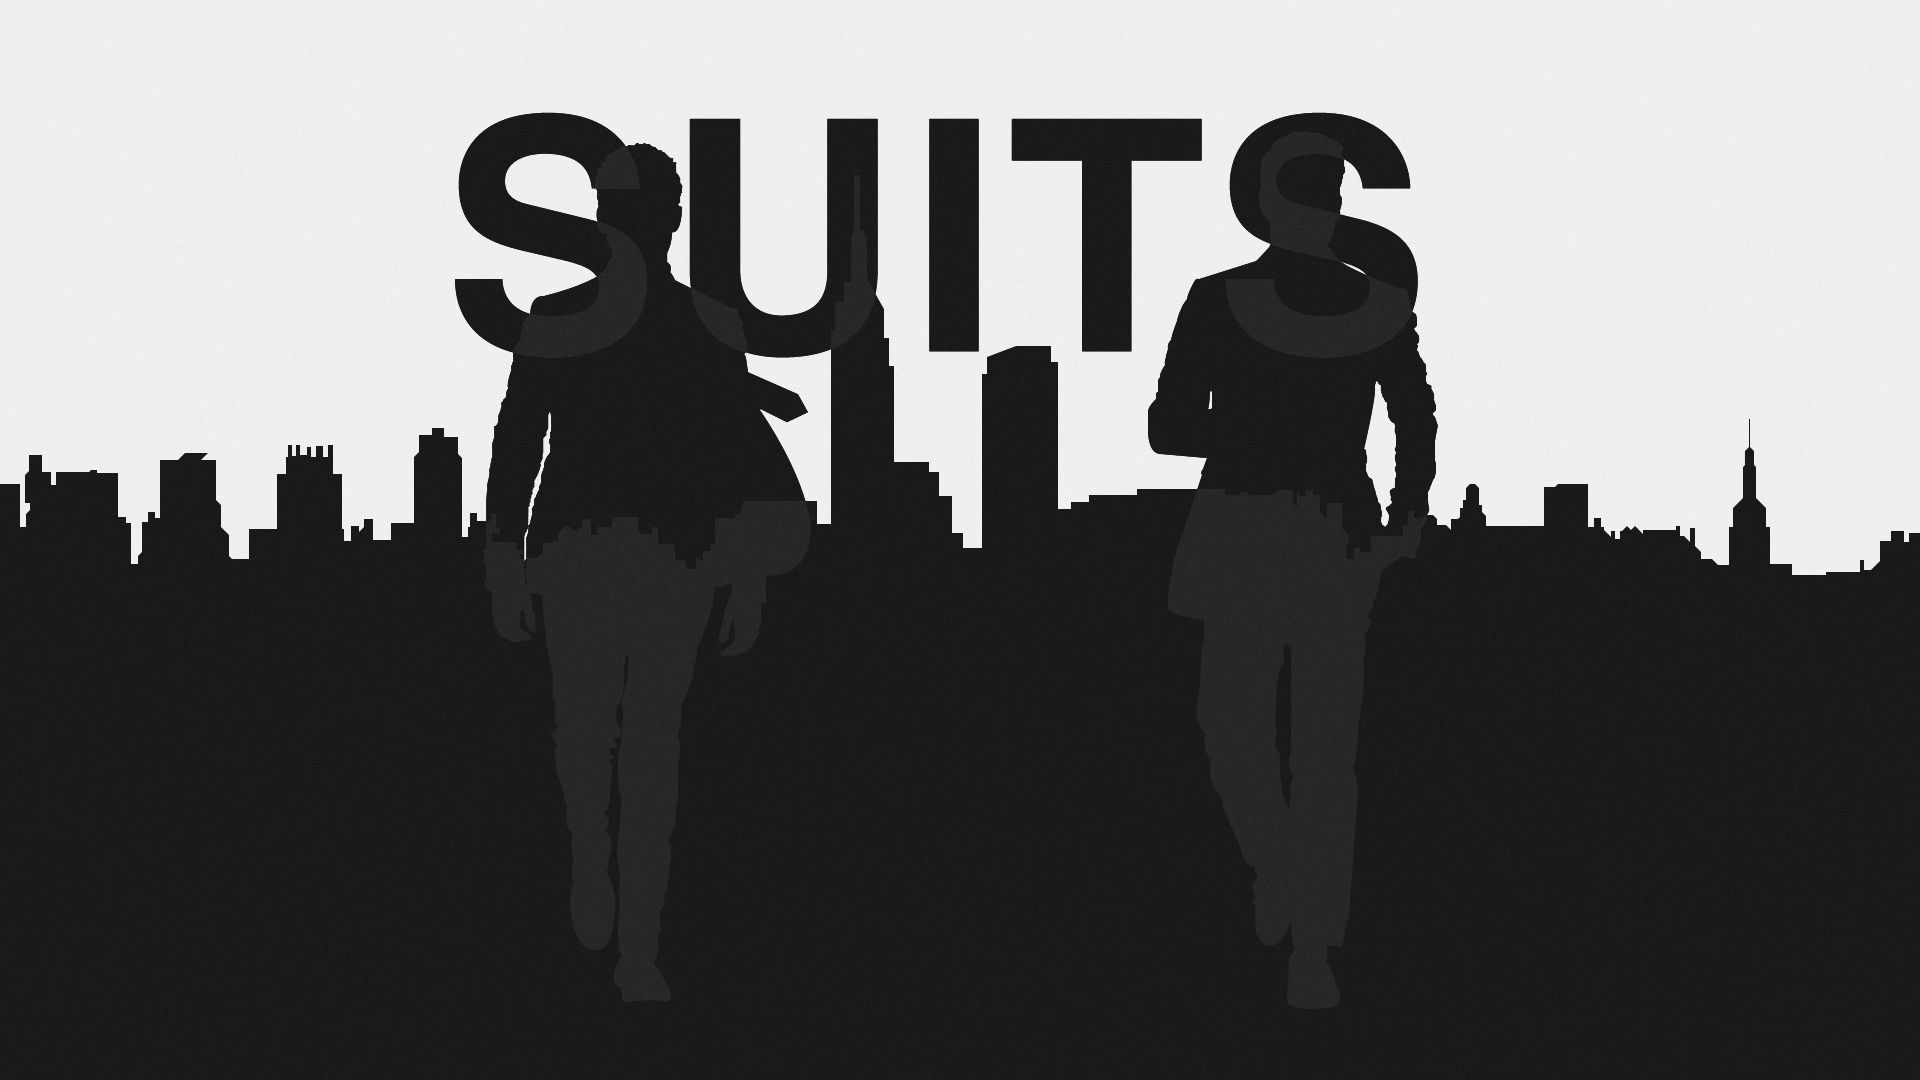 Suits Drama - Wallpaper, High Definition, High Quality, Widescreen